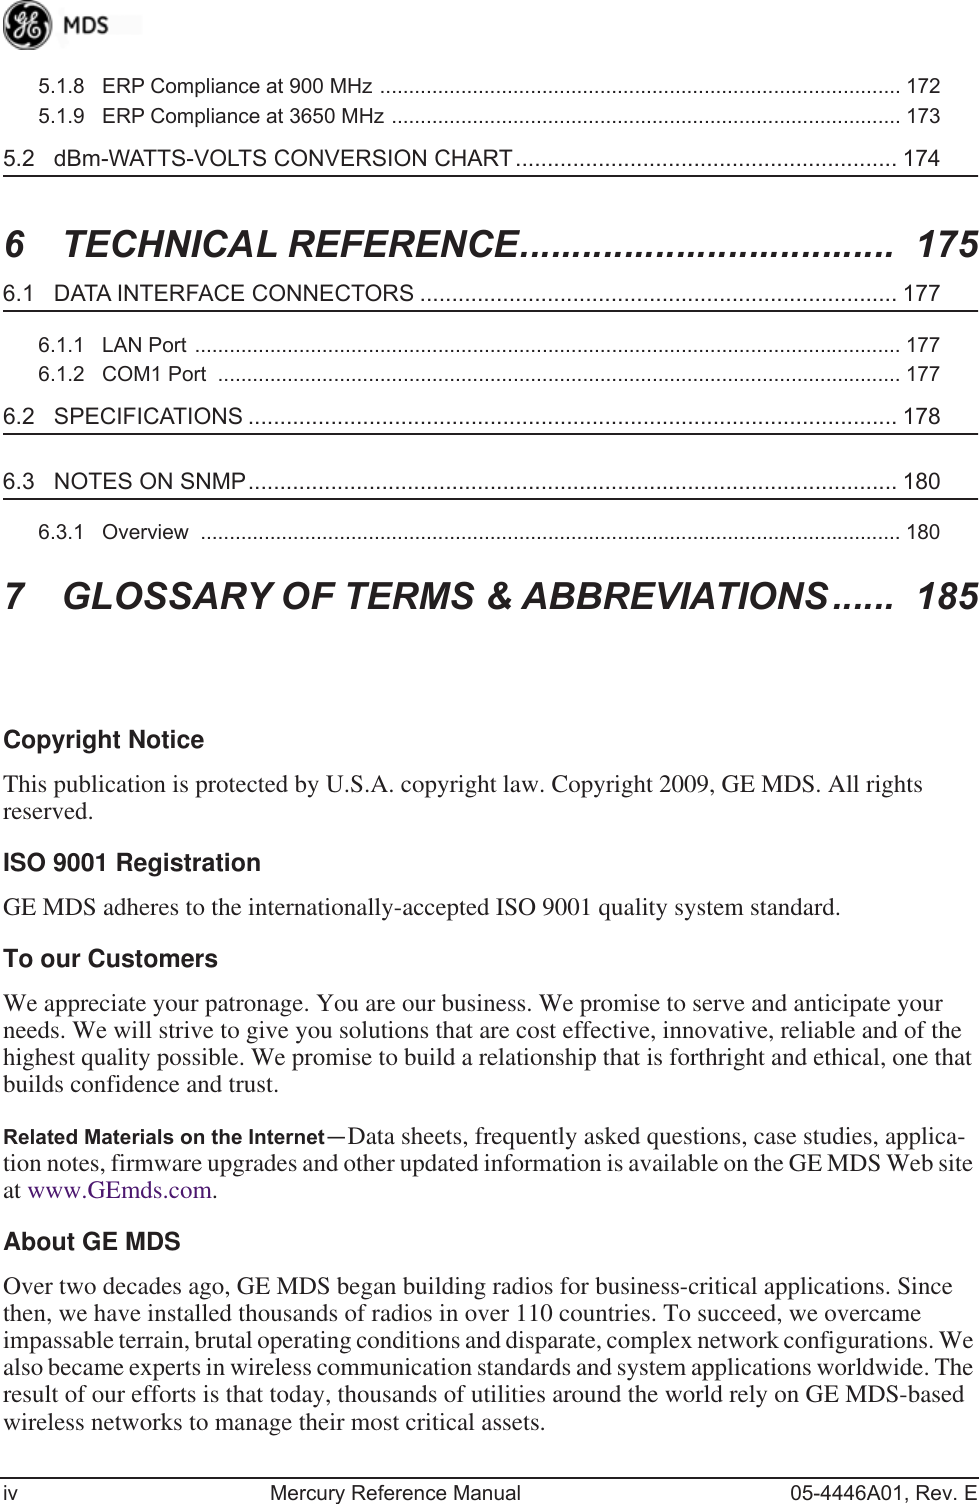  iv Mercury Reference Manual 05-4446A01, Rev. E5.1.8   ERP Compliance at 900 MHz .......................................................................................... 1725.1.9   ERP Compliance at 3650 MHz ........................................................................................ 173 5.2   dBm-WATTS-VOLTS CONVERSION CHART............................................................ 174 6  TECHNICAL REFERENCE....................................  175 6.1   DATA INTERFACE CONNECTORS ........................................................................... 177 6.1.1   LAN Port .......................................................................................................................... 1776.1.2   COM1 Port  ...................................................................................................................... 177 6.2   SPECIFICATIONS ...................................................................................................... 178 6.3   NOTES ON SNMP...................................................................................................... 180 6.3.1   Overview  ......................................................................................................................... 180 7  GLOSSARY OF TERMS &amp; ABBREVIATIONS......  185 Copyright Notice This publication is protected by U.S.A. copyright law. Copyright 2009, GE MDS. All rights reserved. ISO 9001 Registration GE MDS adheres to the internationally-accepted ISO 9001 quality system standard. To our Customers We appreciate your patronage. You are our business. We promise to serve and anticipate your needs. We will strive to give you solutions that are cost effective, innovative, reliable and of the highest quality possible. We promise to build a relationship that is forthright and ethical, one that builds confidence and trust. Related Materials on the Internet — Data sheets, frequently asked questions, case studies, applica-tion notes, firmware upgrades and other updated information is available on the GE MDS Web site at www.GEmds.com. About GE MDS Over two decades ago, GE MDS began building radios for business-critical applications. Since then, we have installed thousands of radios in over 110 countries. To succeed, we overcame impassable terrain, brutal operating conditions and disparate, complex network configurations. We also became experts in wireless communication standards and system applications worldwide. The result of our efforts is that today, thousands of utilities around the world rely on GE MDS-based wireless networks to manage their most critical assets.